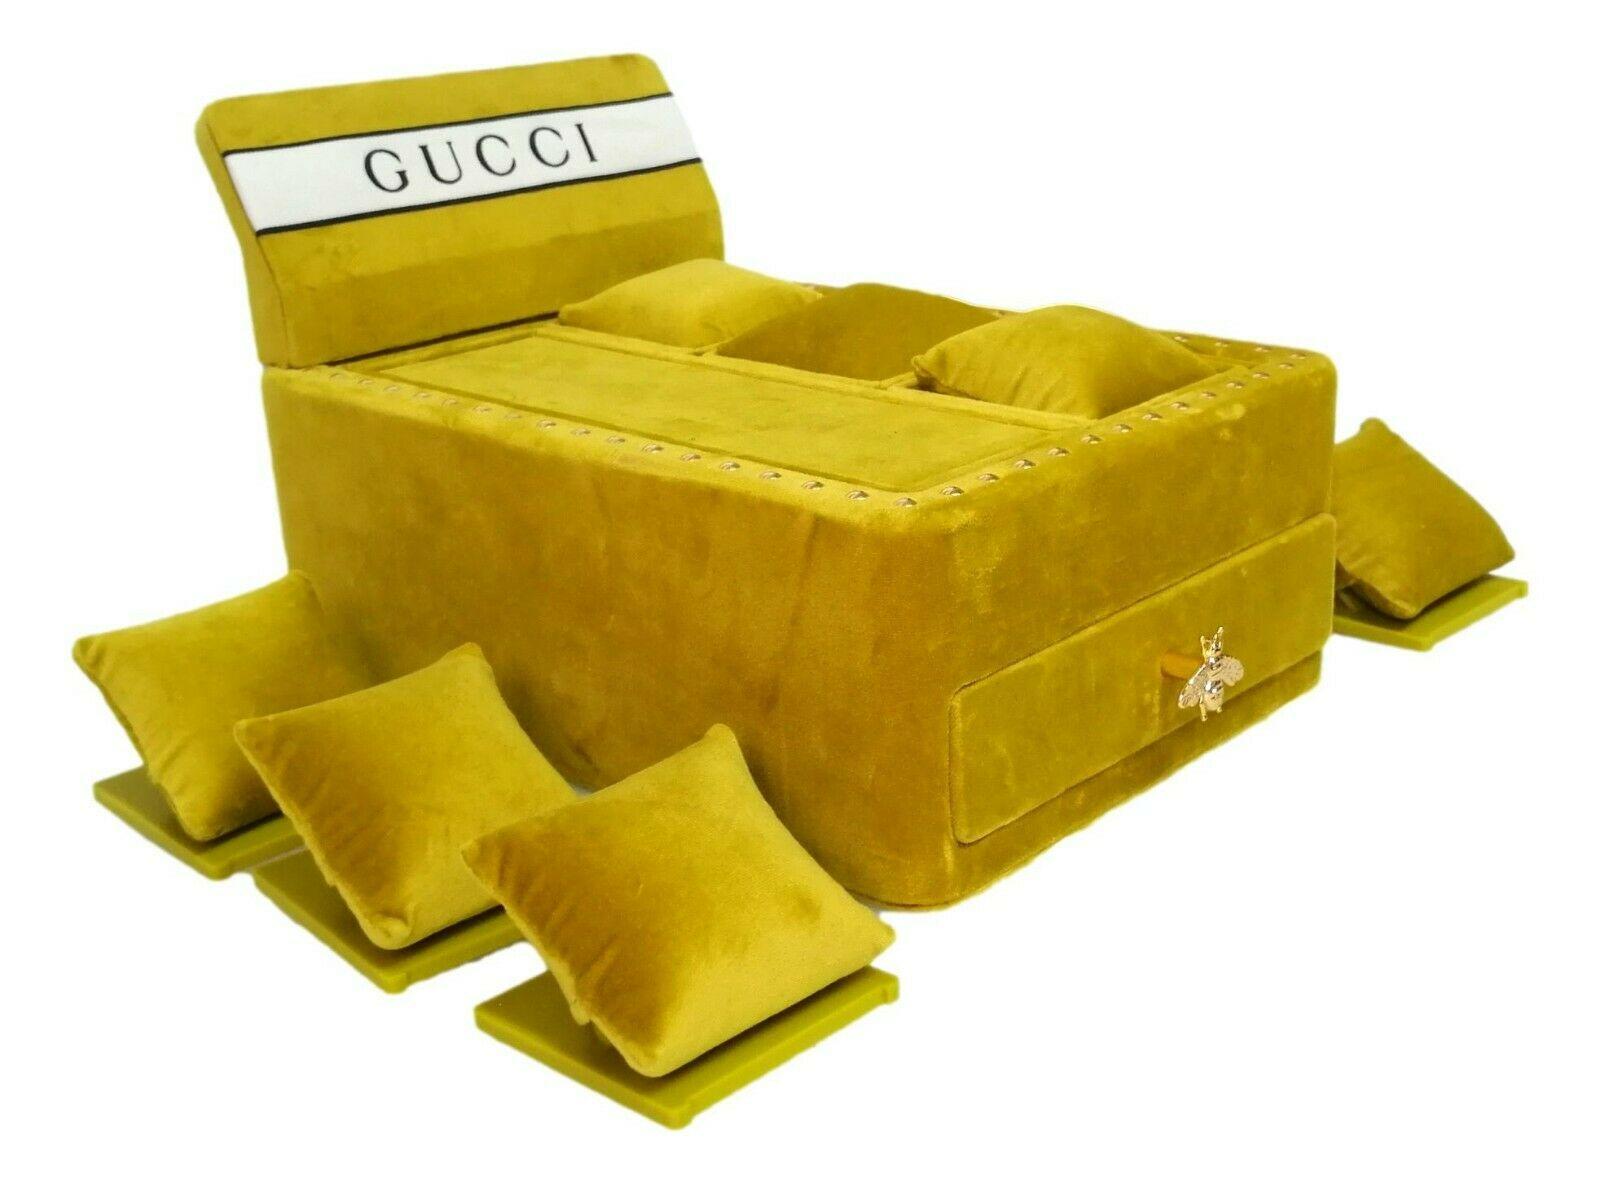 Rare original gucci watch and jewelry display exclusively reserved for gucci chain stores

made of mustard yellow velvet, it measures 20 cm in width, 30 cm in depth and 20 cm in height

equipped with a four-place drawer with bee-shaped